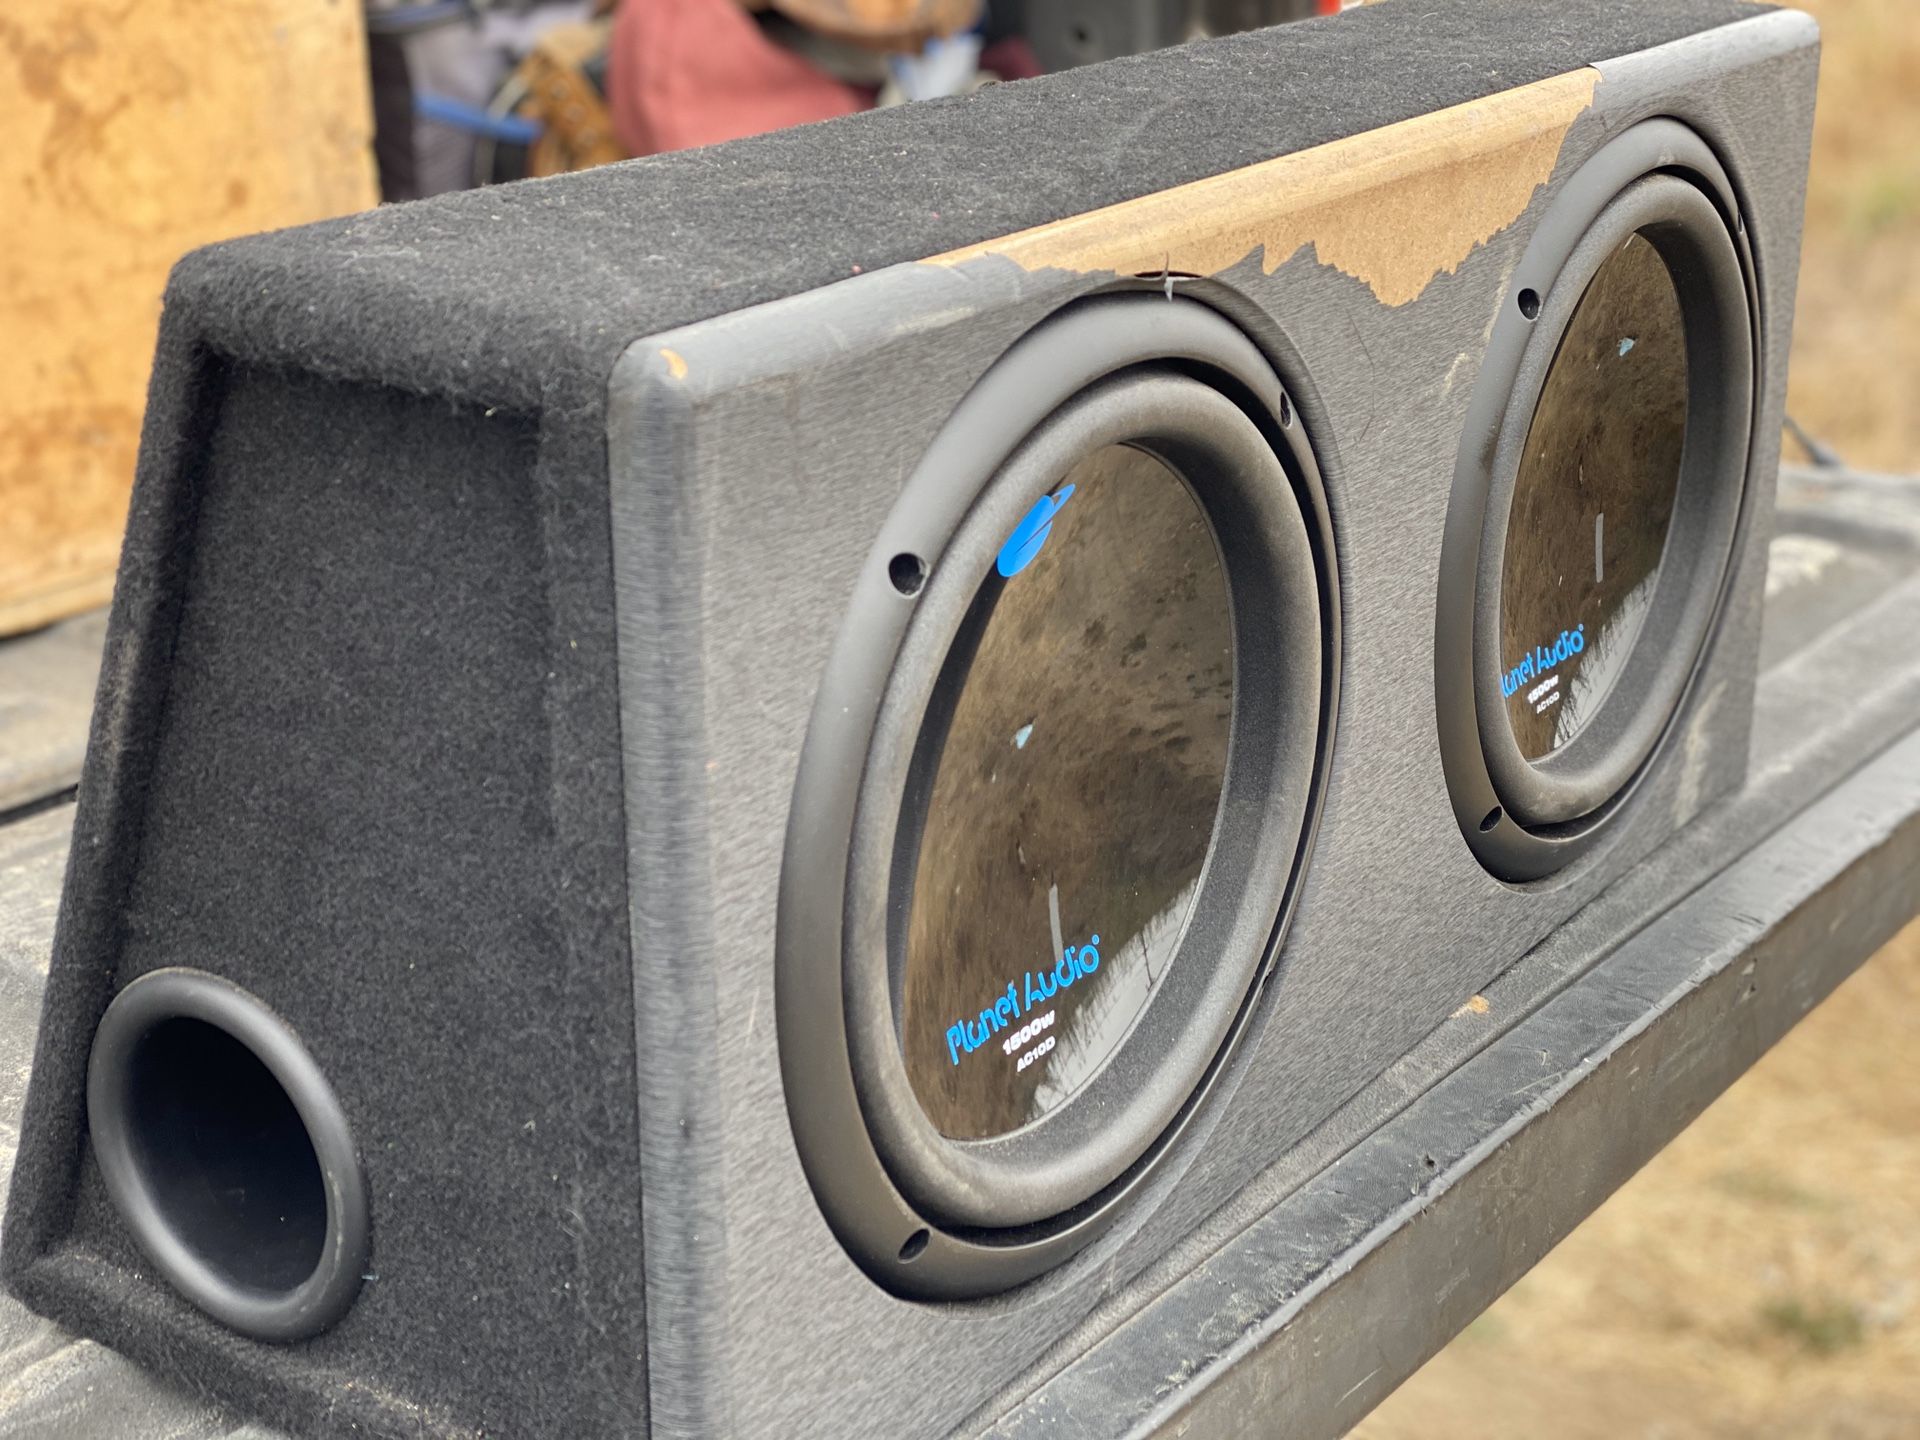 Planet audio 10 inch subs